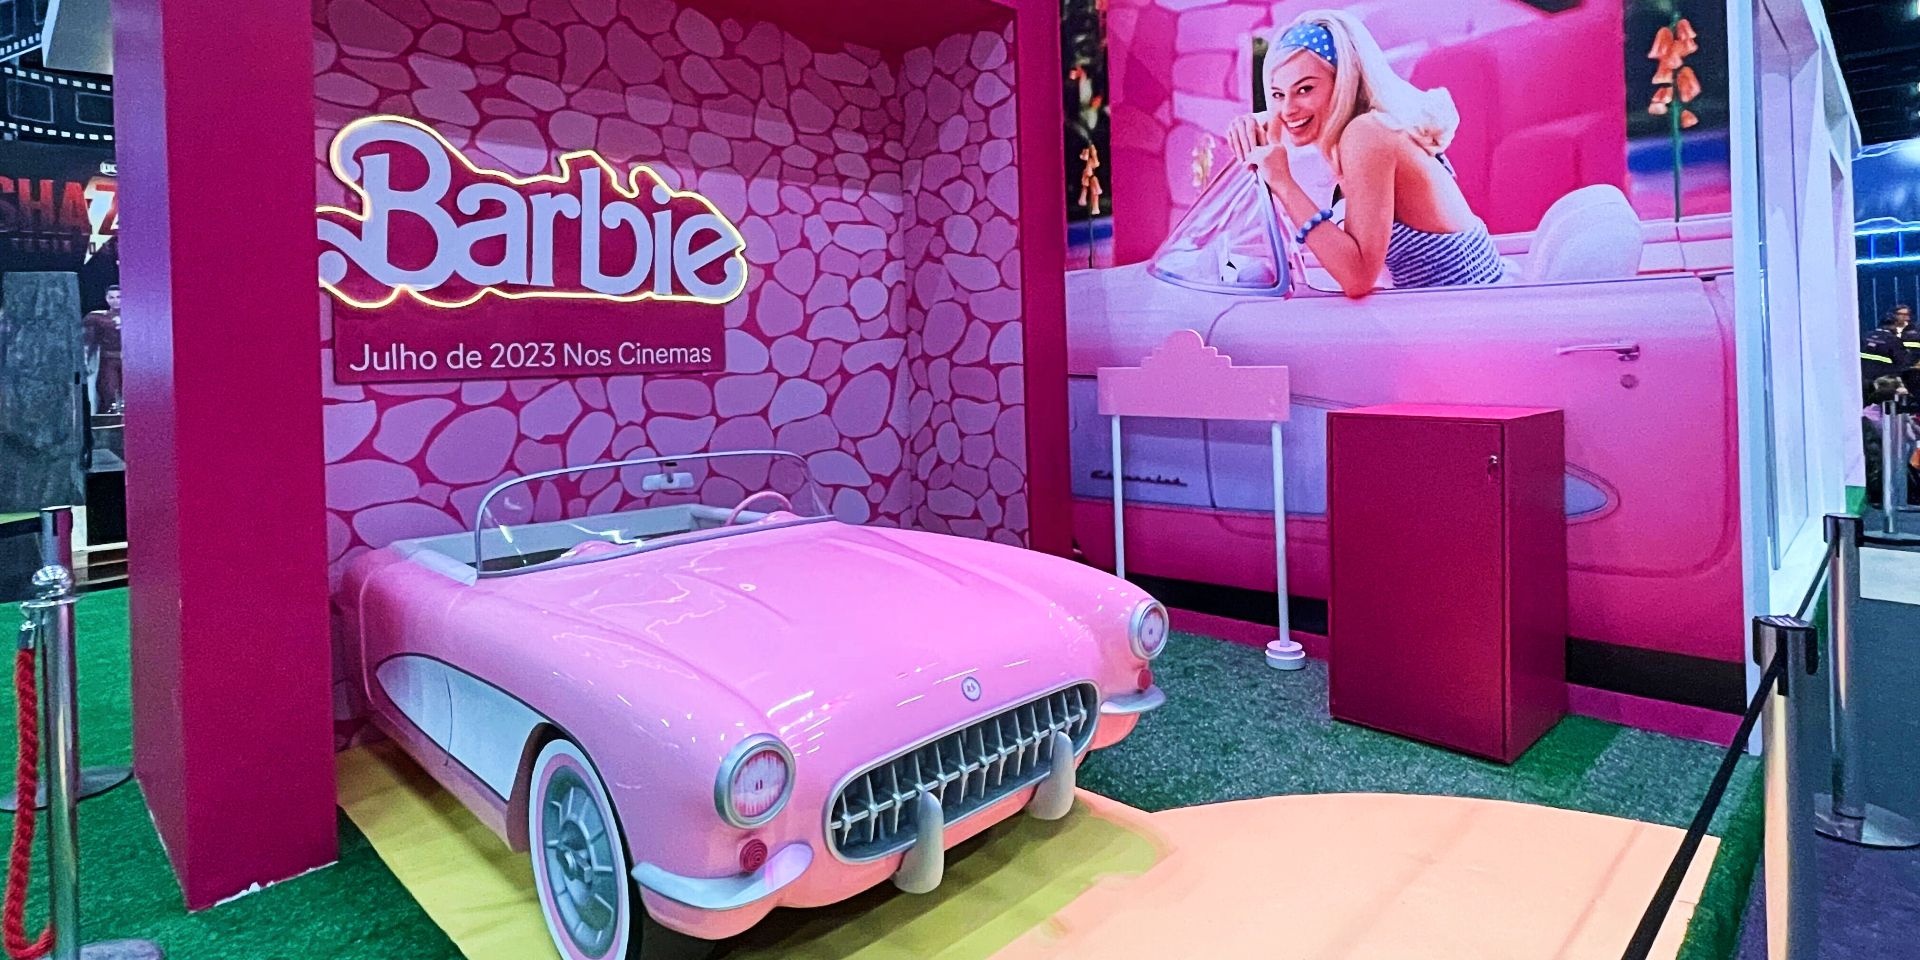 Barbie Movie Display Lets Fans Step Into Her Pink Plastic World